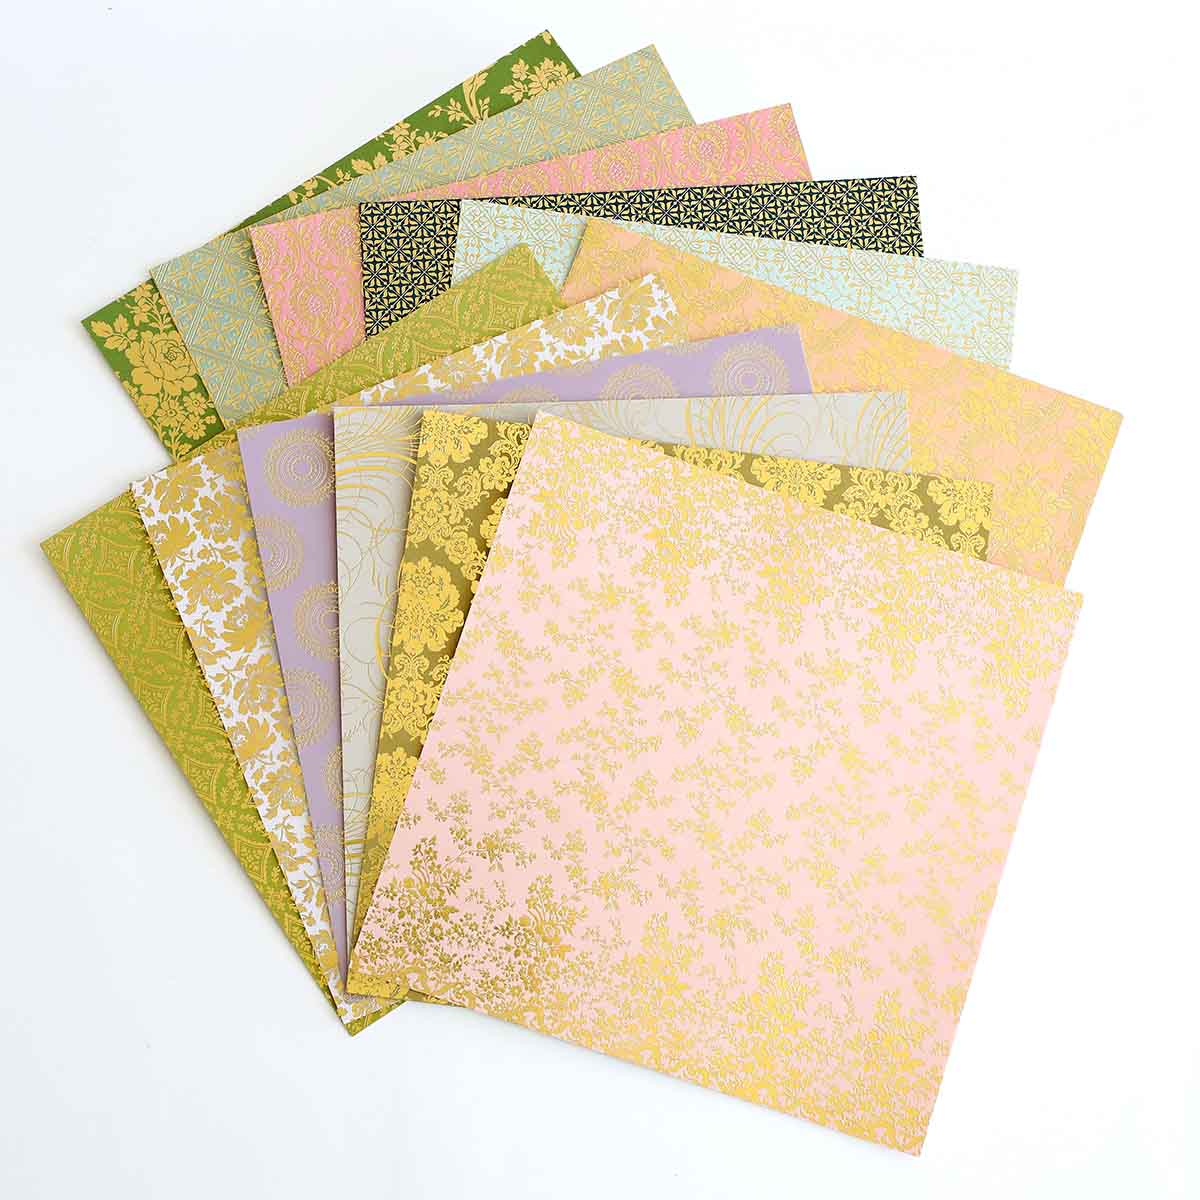 American Crafts Single-Sided Specialty Cardstock 12x12 Lattice/Gold Foil